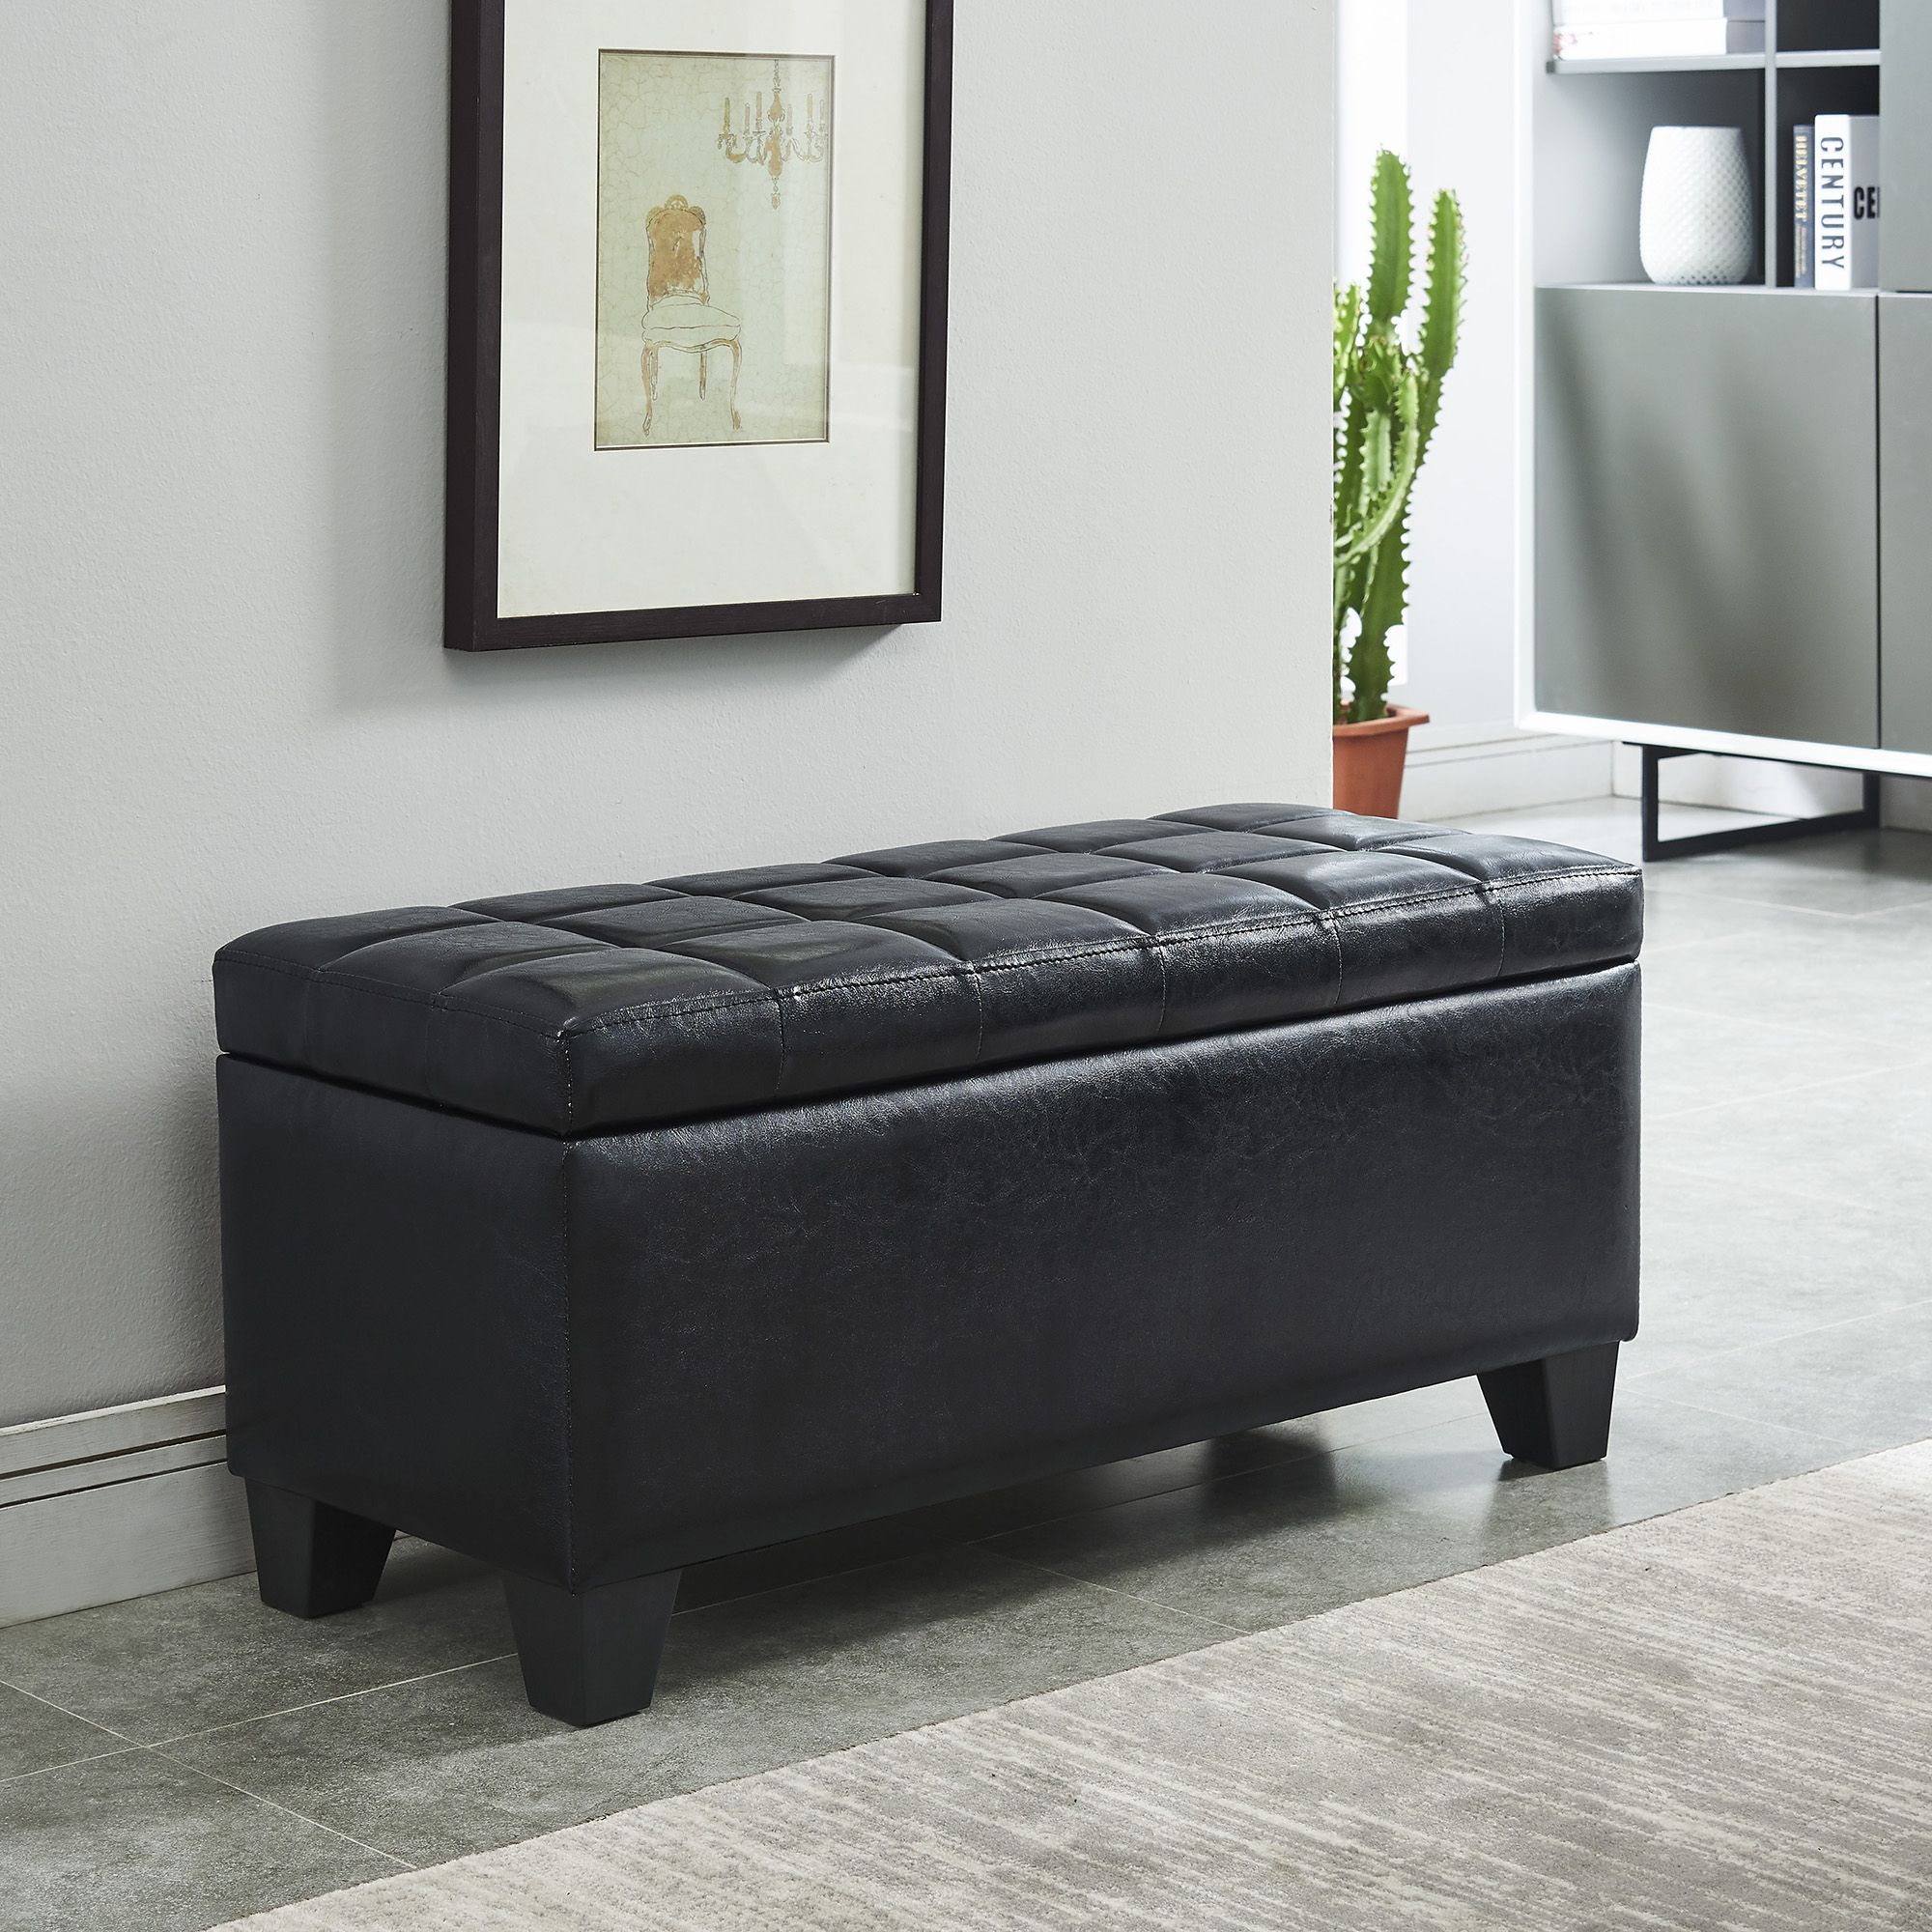 Faux Leather Storage Ottoman, Black – Walmart – Walmart Within Weathered Gold Leather Hide Pouf Ottomans (View 11 of 20)